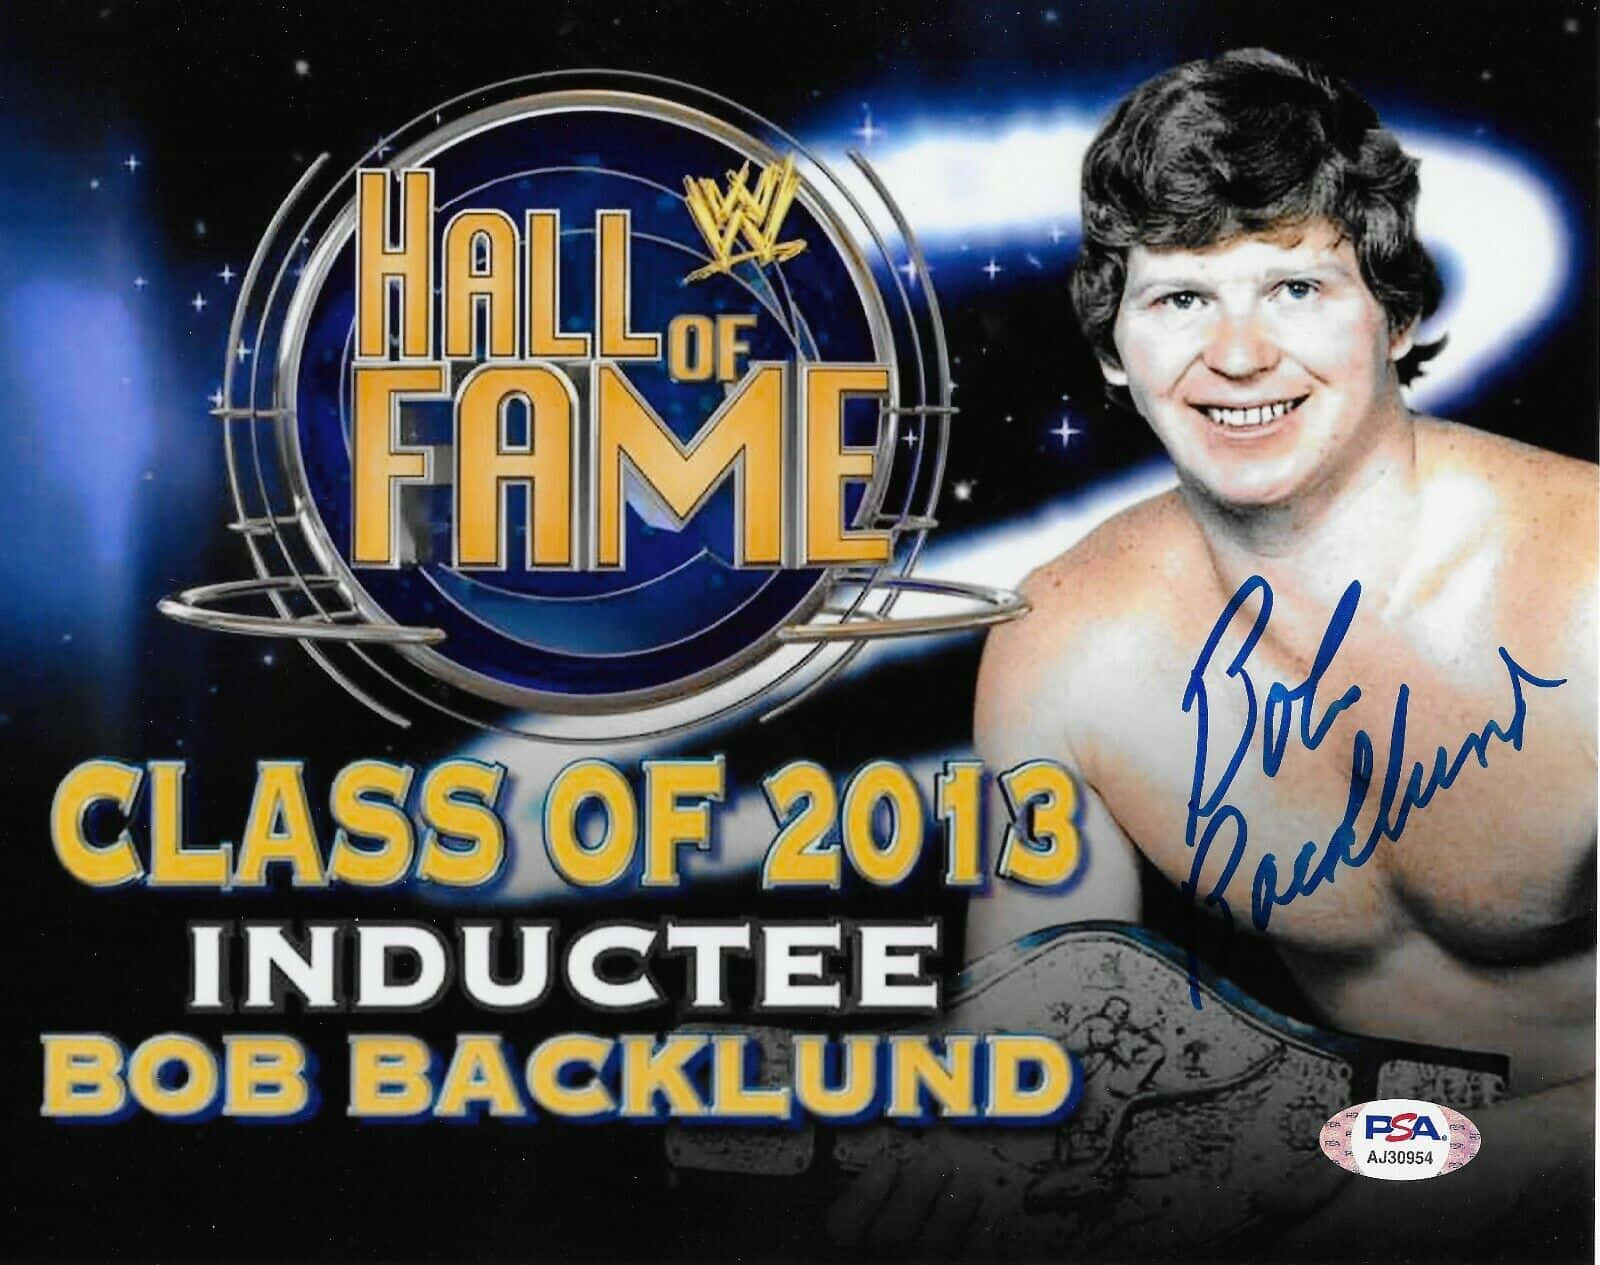 Bob Backlund 2013 Wwe Hall Of Fame Inductee Wallpaper